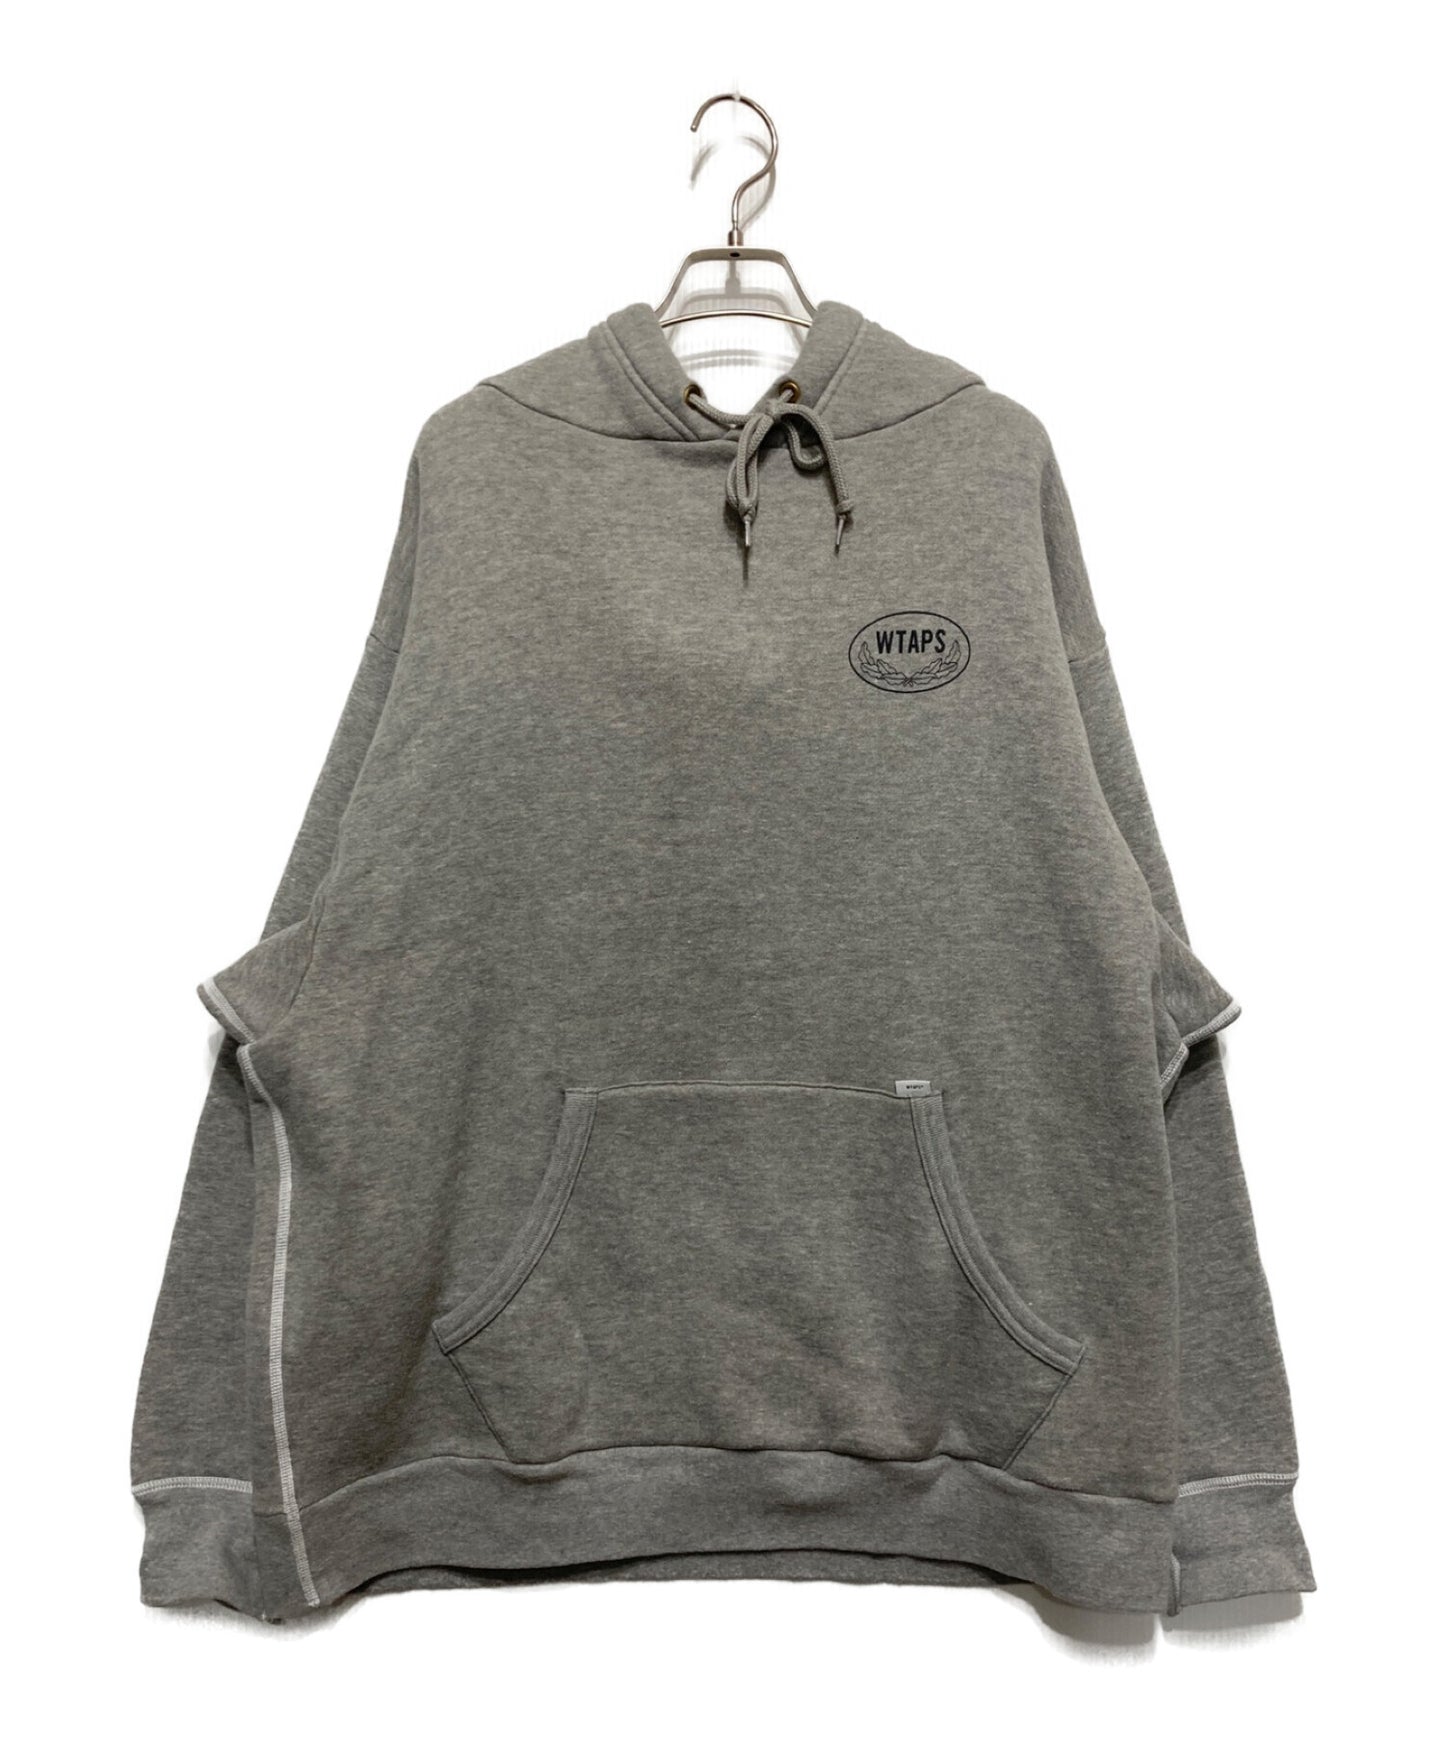 [Pre-owned] WTAPS ACADEMY HOODED COTTON Sweatshirt 212ATDT-CSM29 212ATDT-CSM29